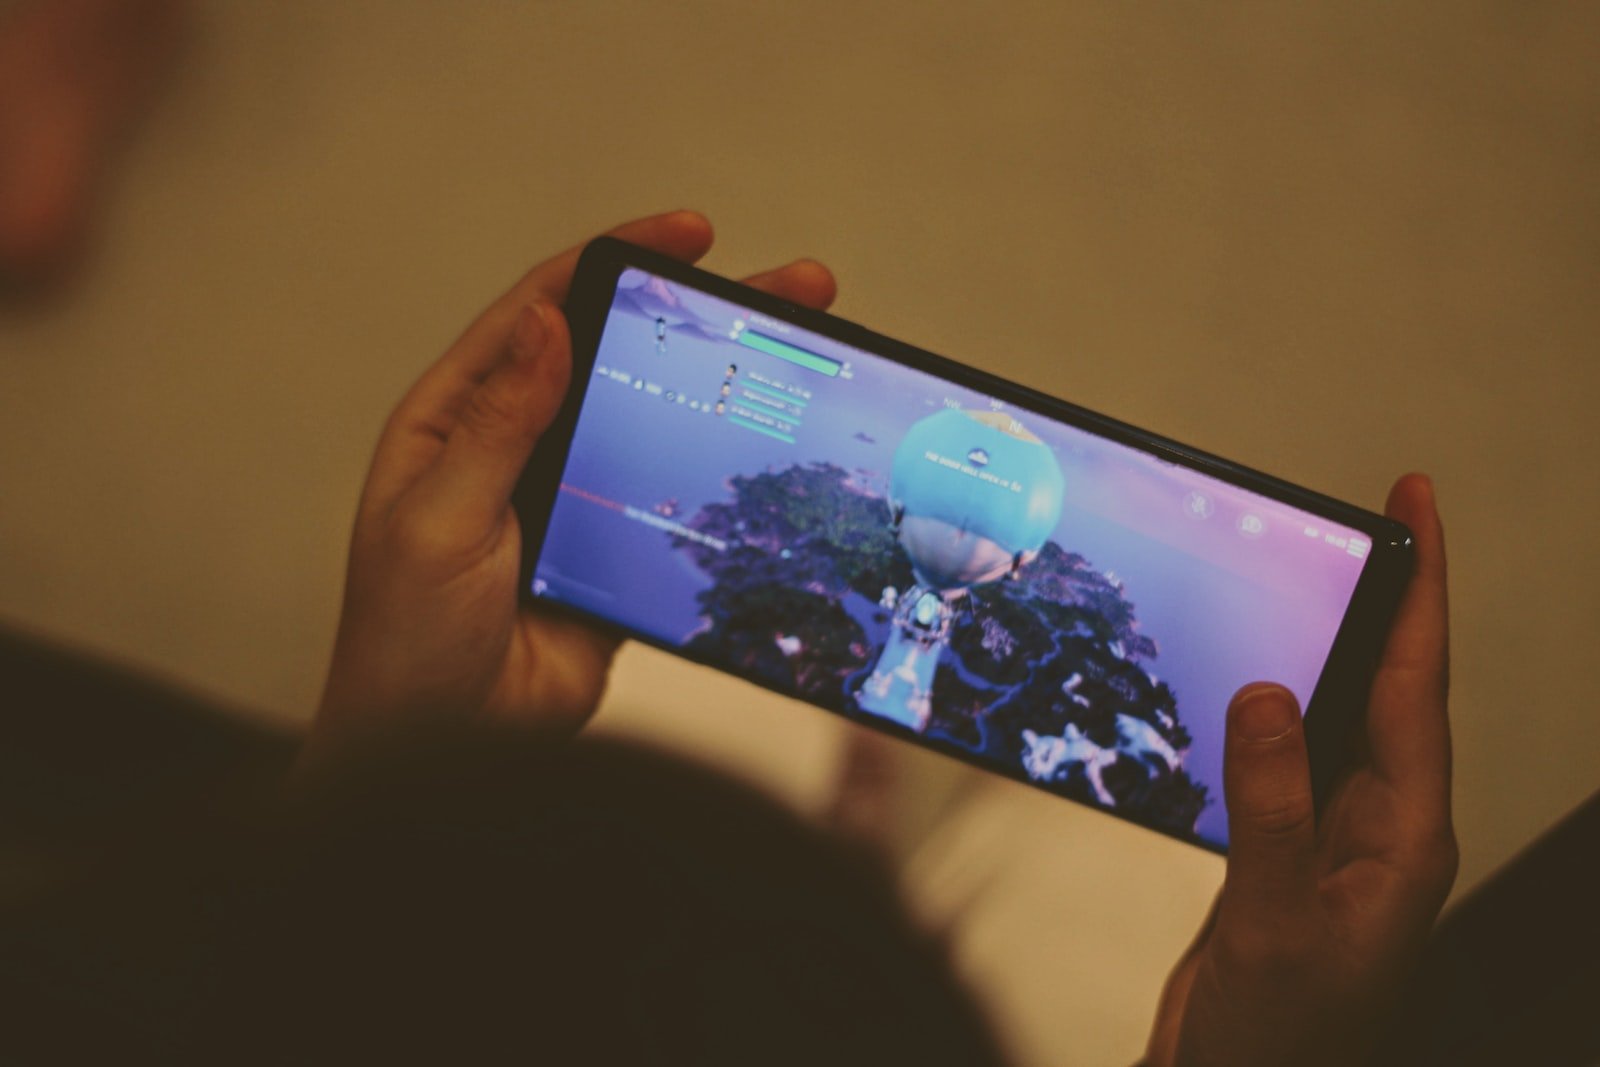 Fortnite Mobile played on the smartphone